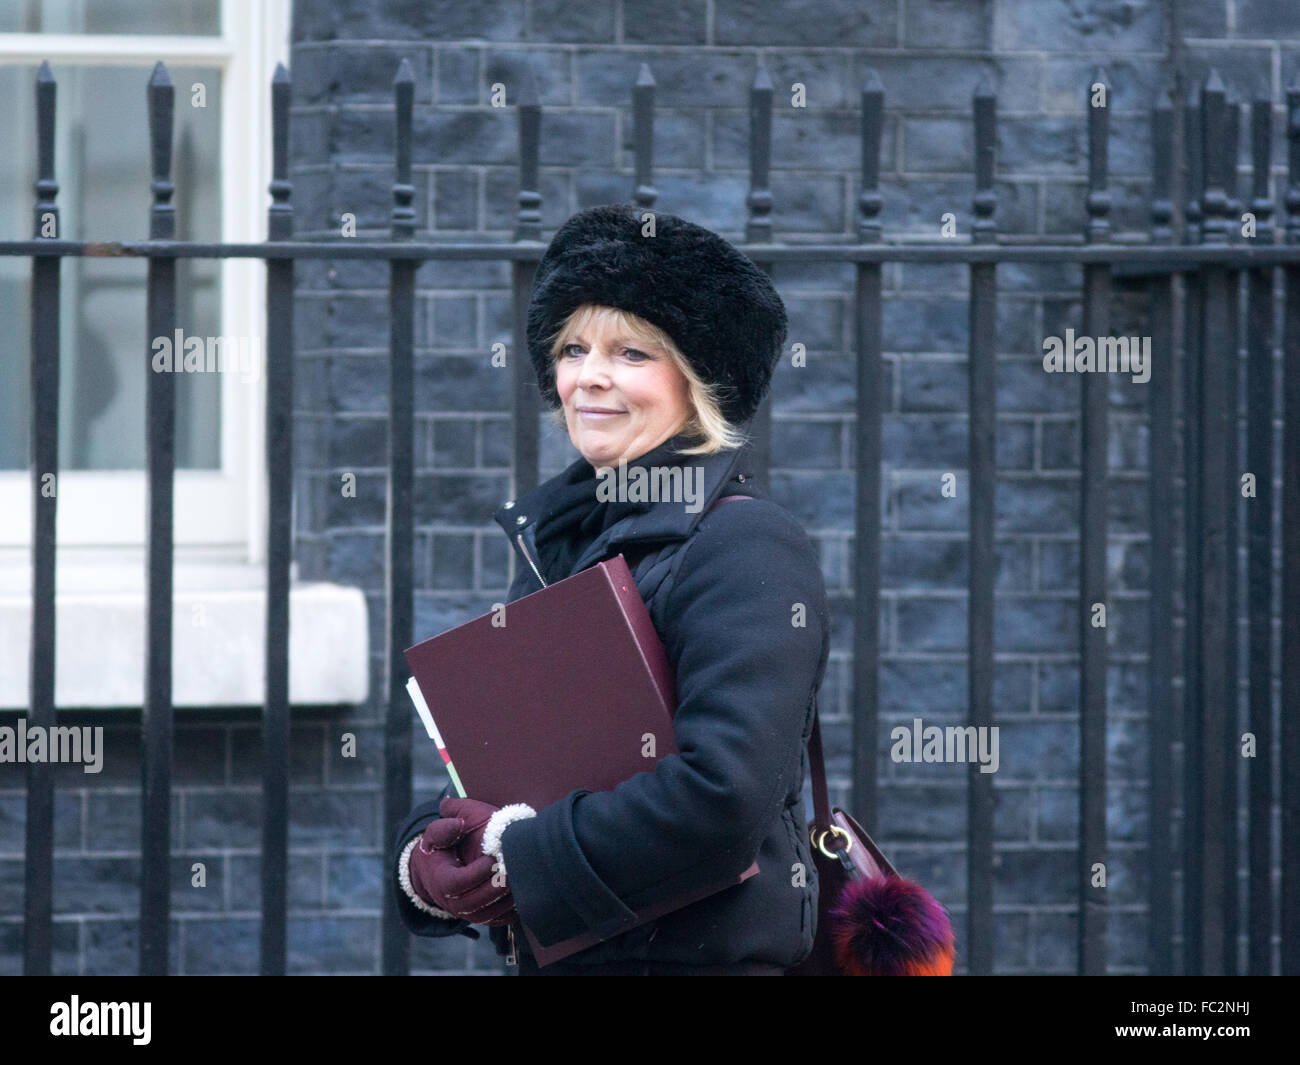 Anna Soubry,Minister for small business,Industry and Enterprise,arrives at Number 10 Downing Street for a Cabinet meeting Stock Photo